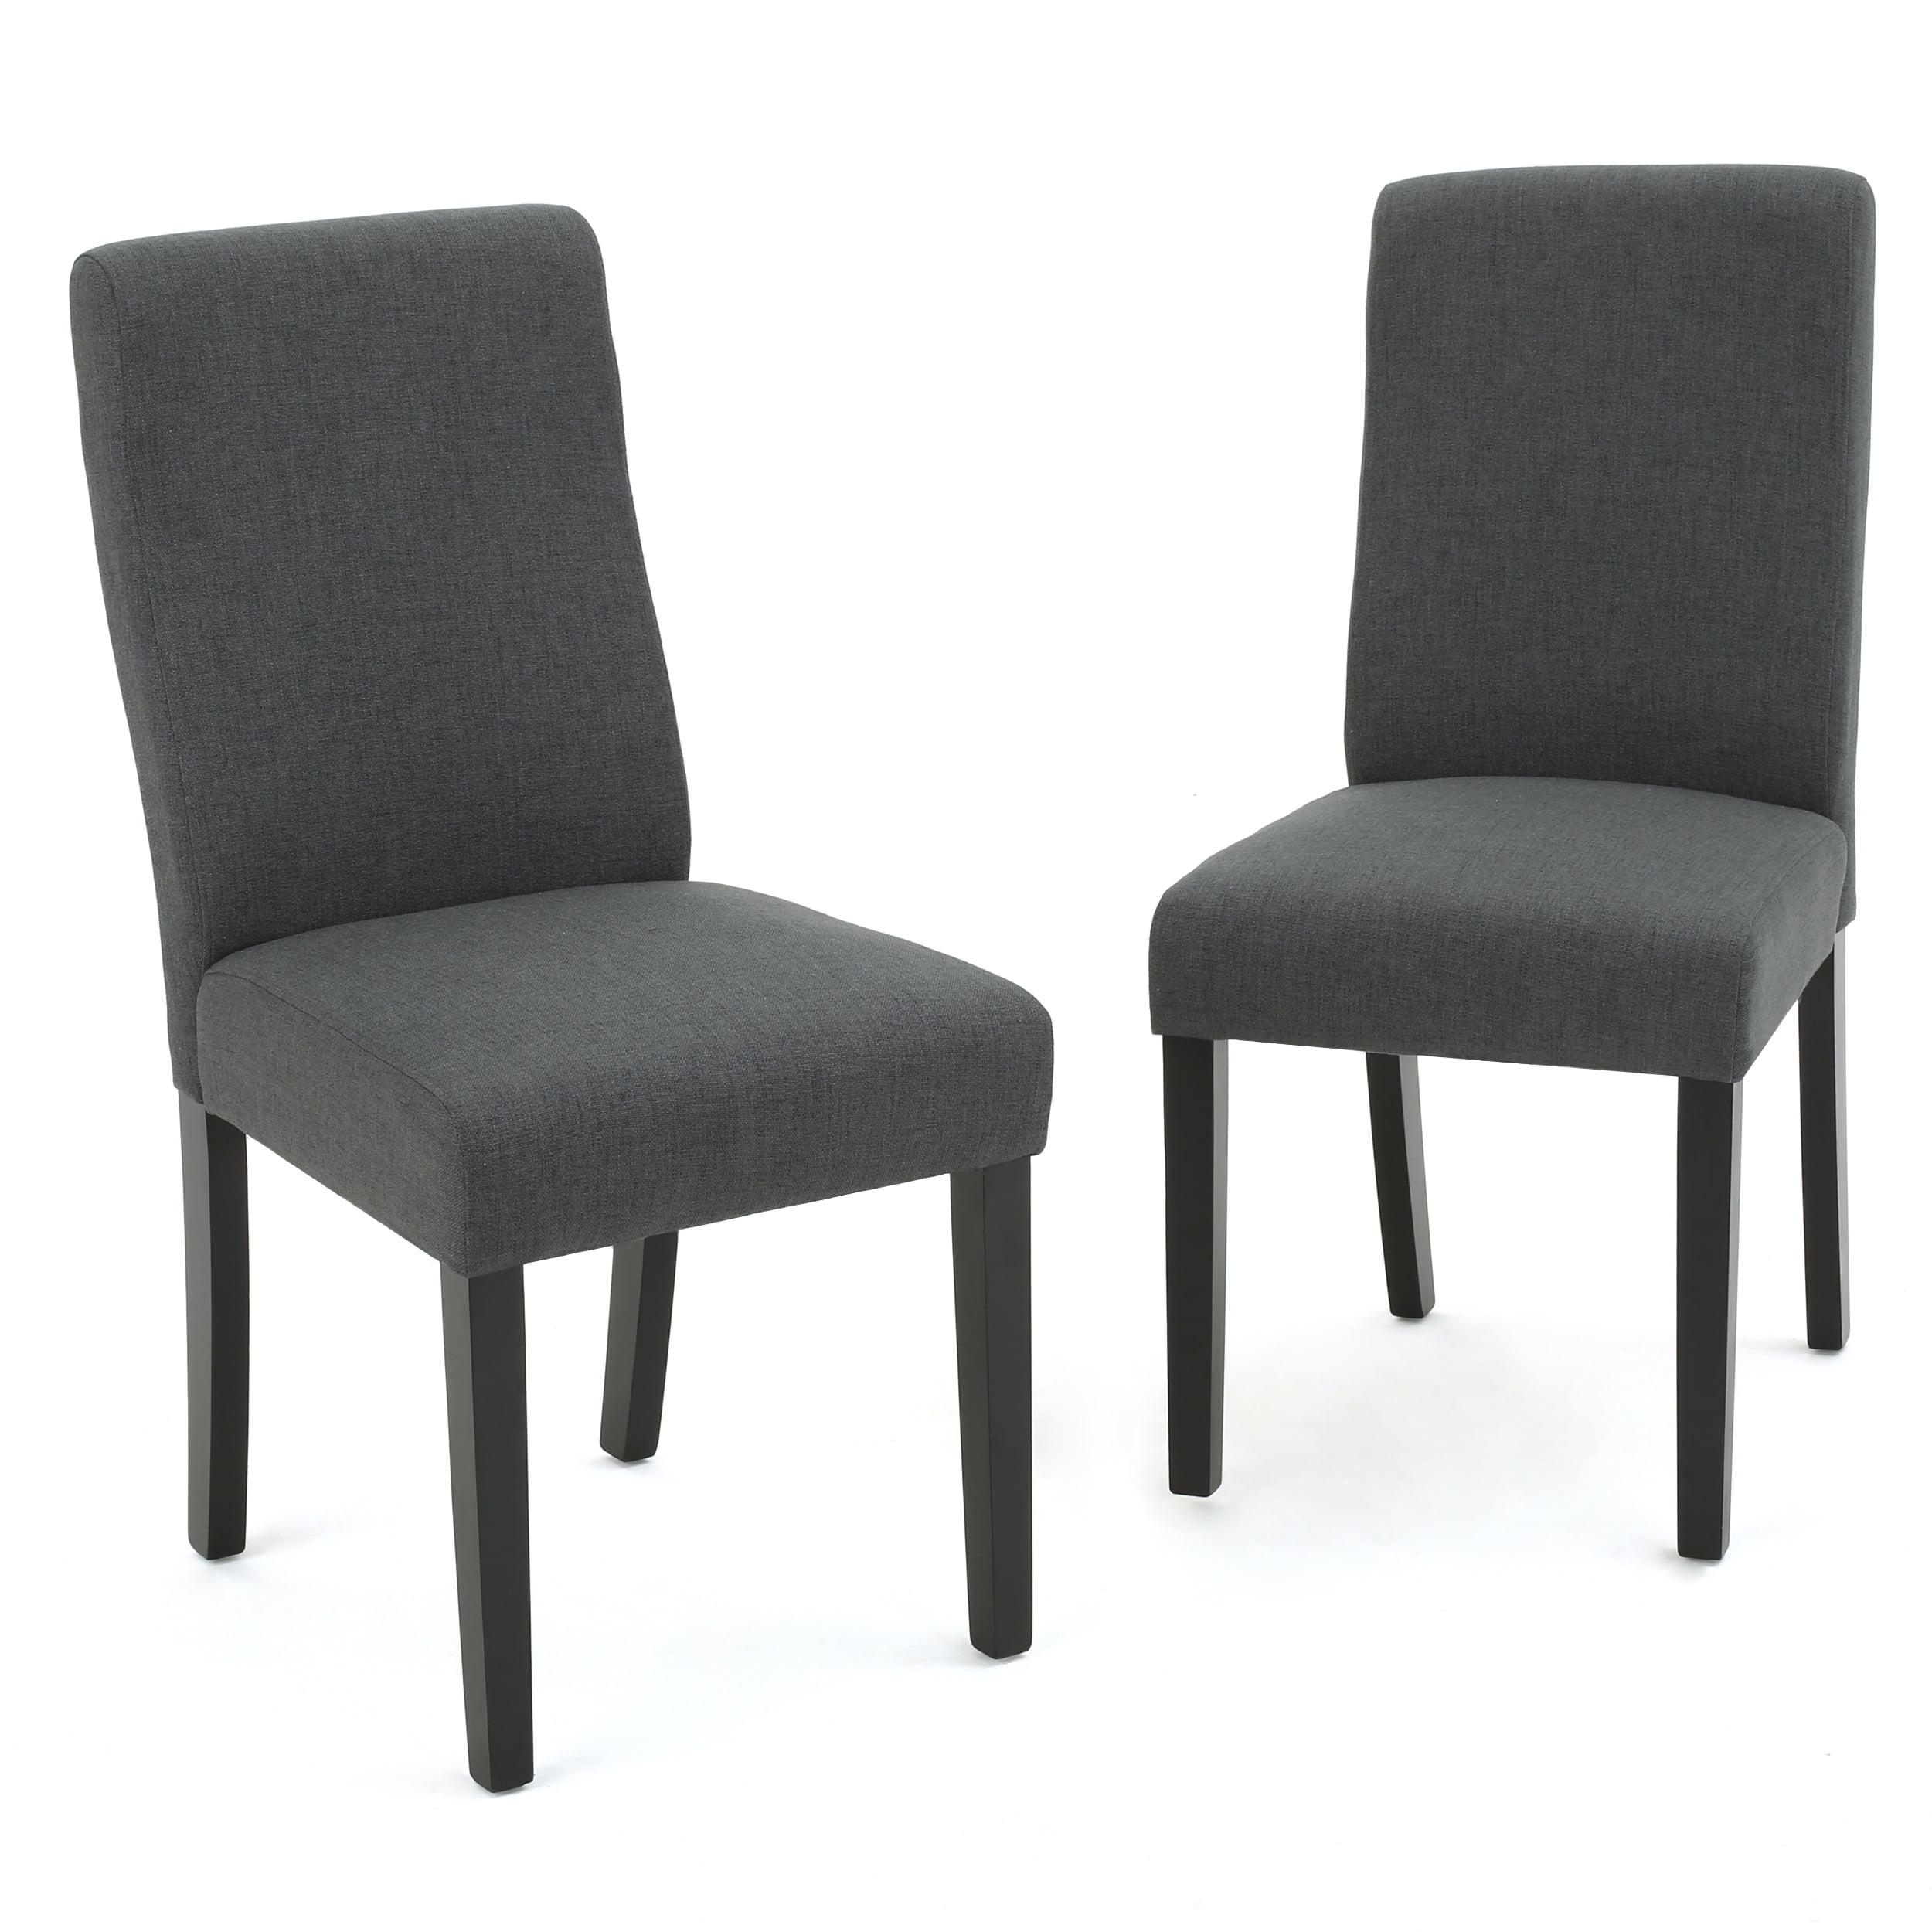 Lamesa High-Back Dark Gray Leather & Wood Contemporary Dining Chairs, Set of 2